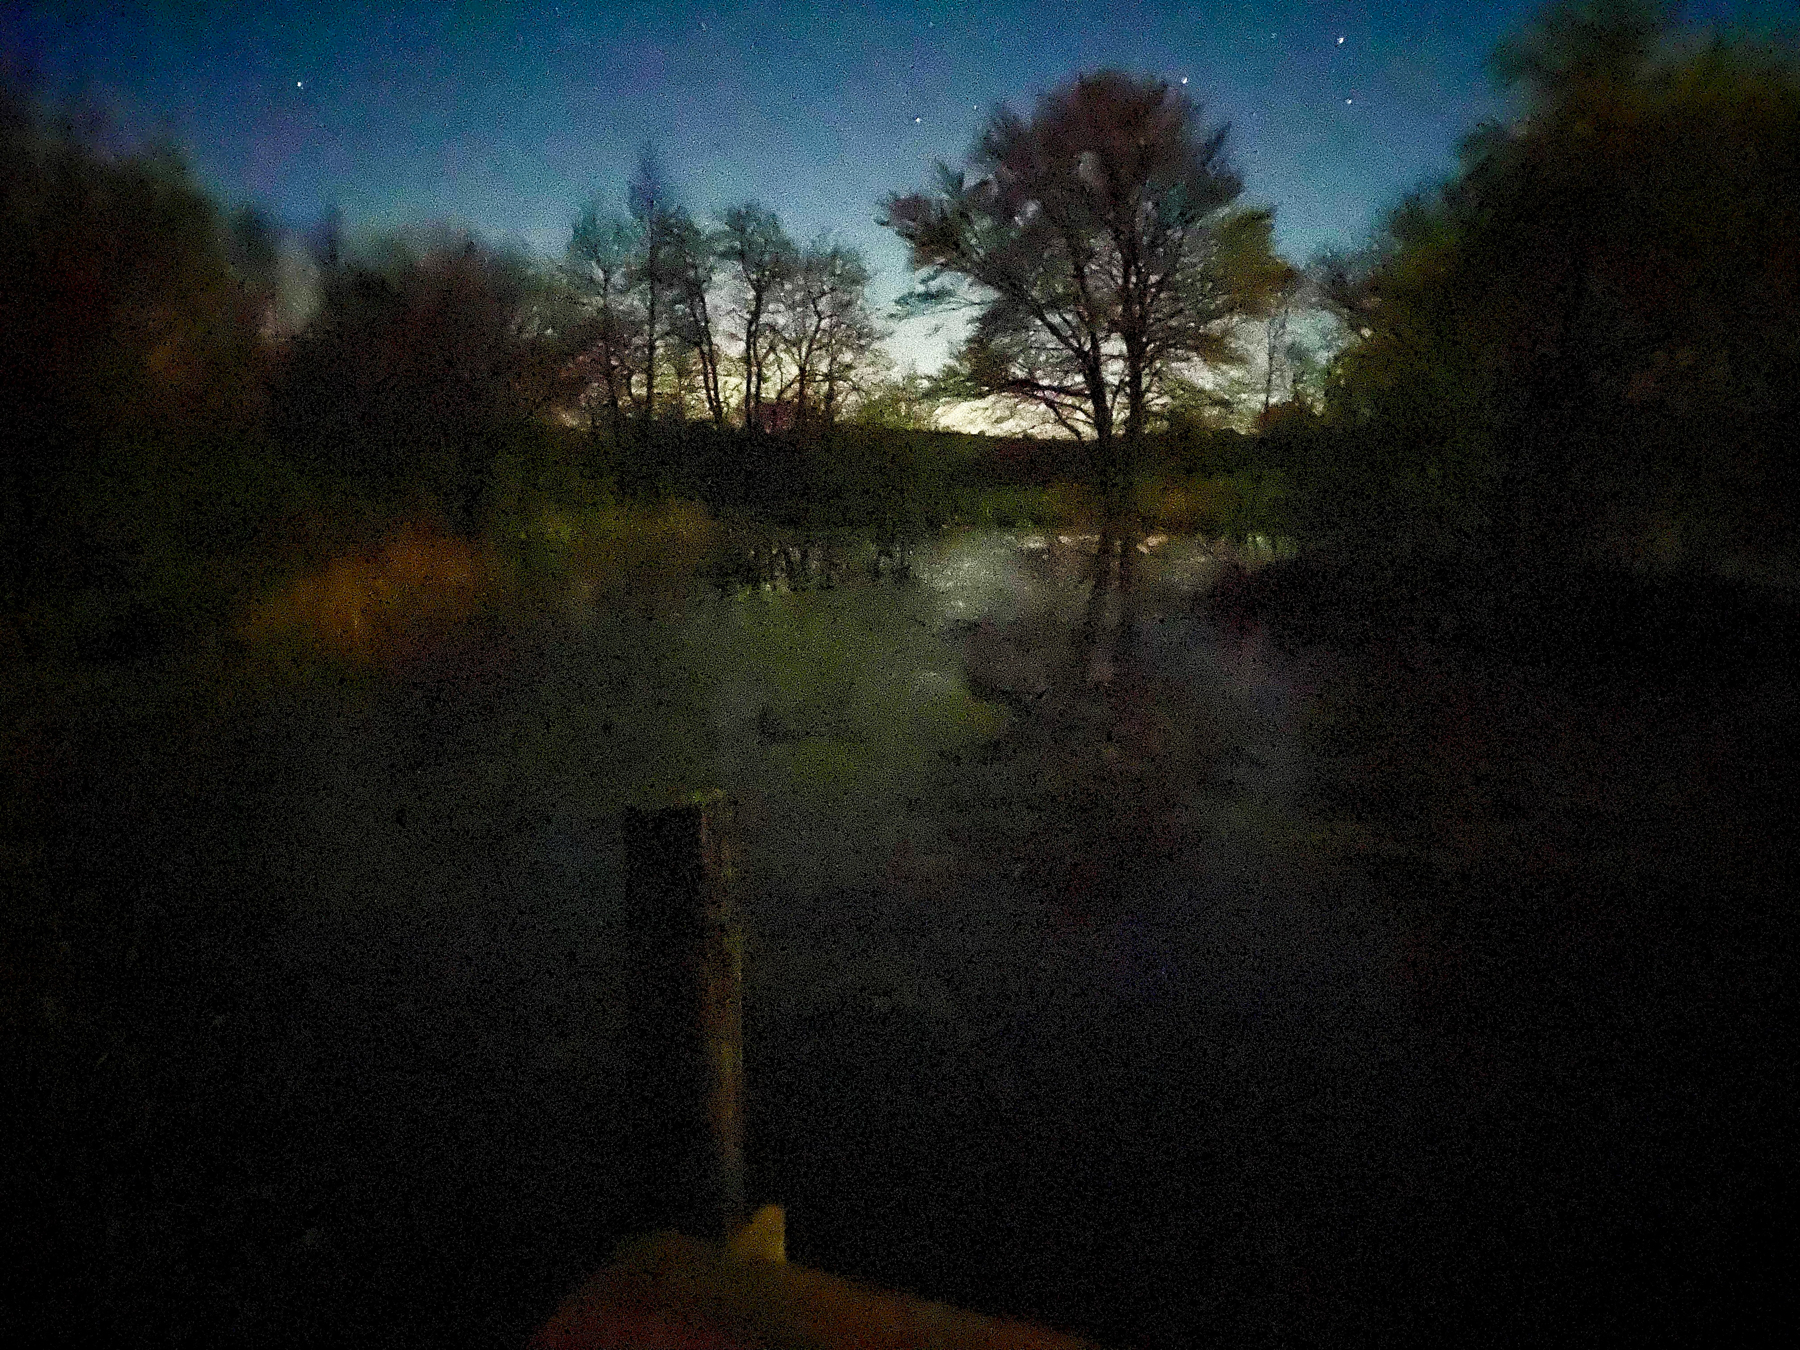 A low-light scene with silhouettes of trees against a twilight sky reflected on the surface of a pond, with a wooden dock post in the foreground.